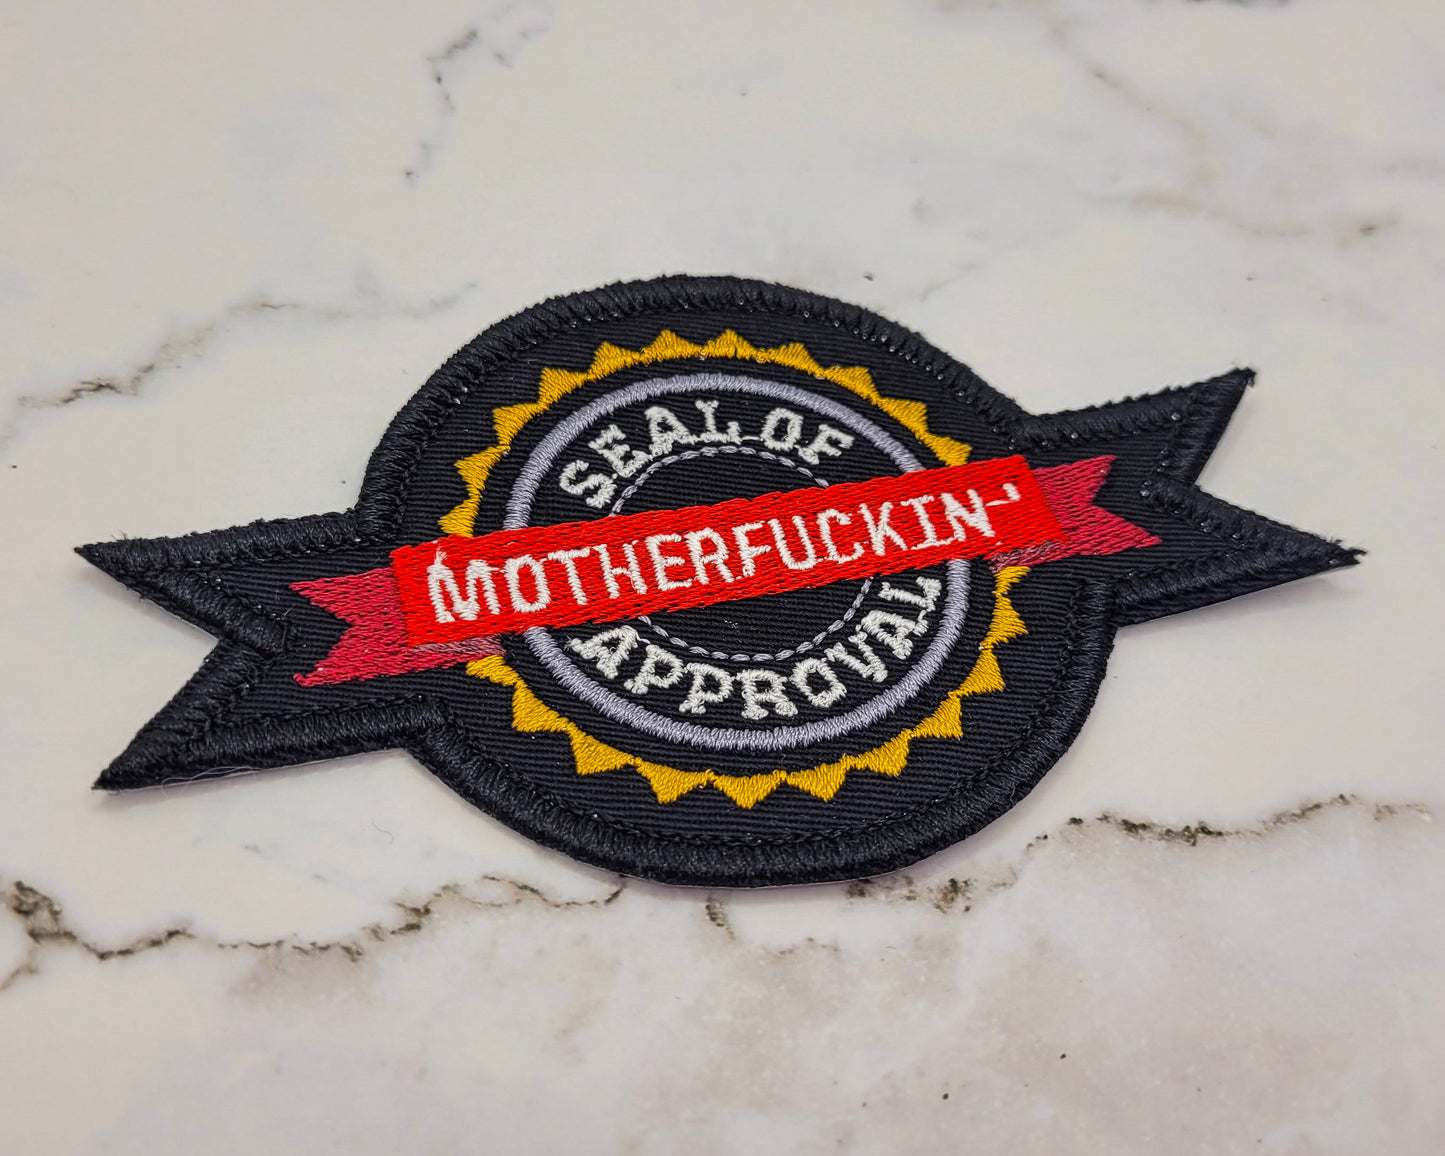 Seal of Motherfuckin' Approval Embroidered Patch